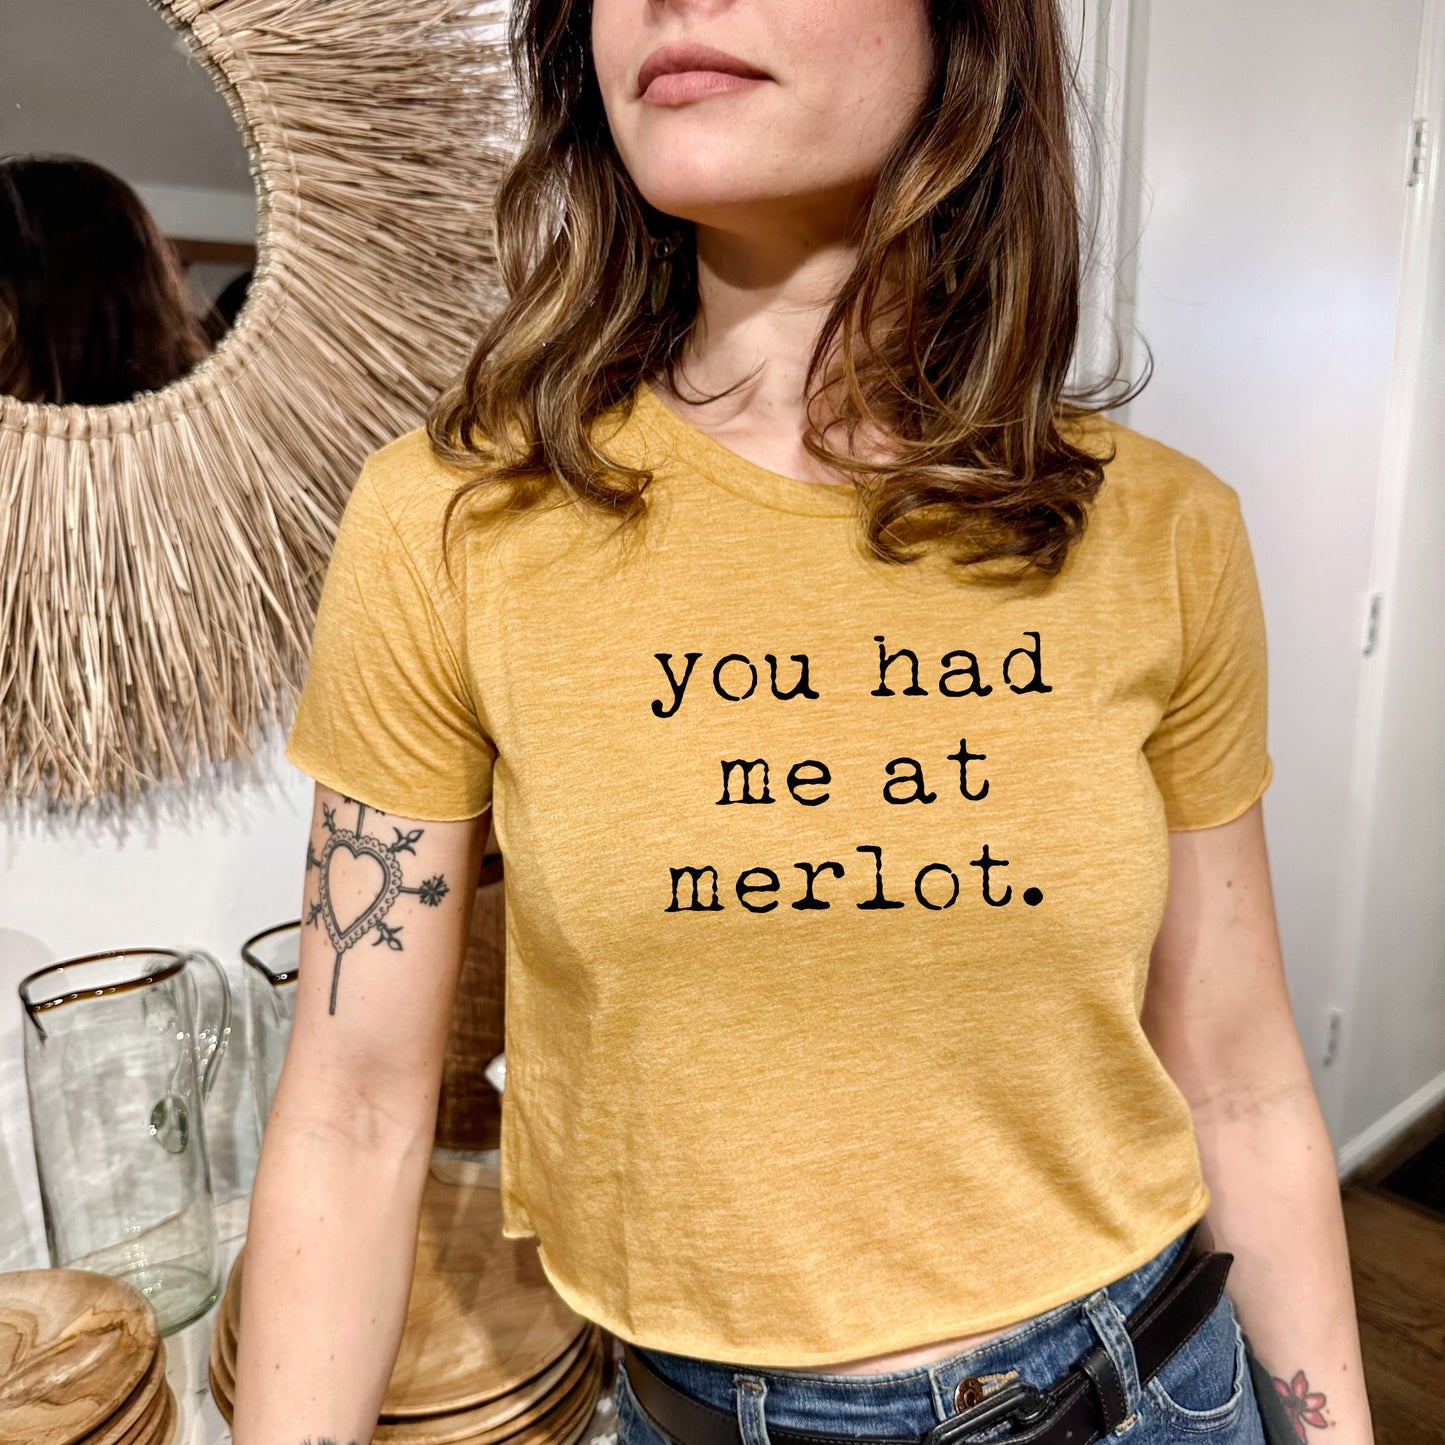 You Had Me At Merlot - Women's Crop Tee - Heather Gray or Gold